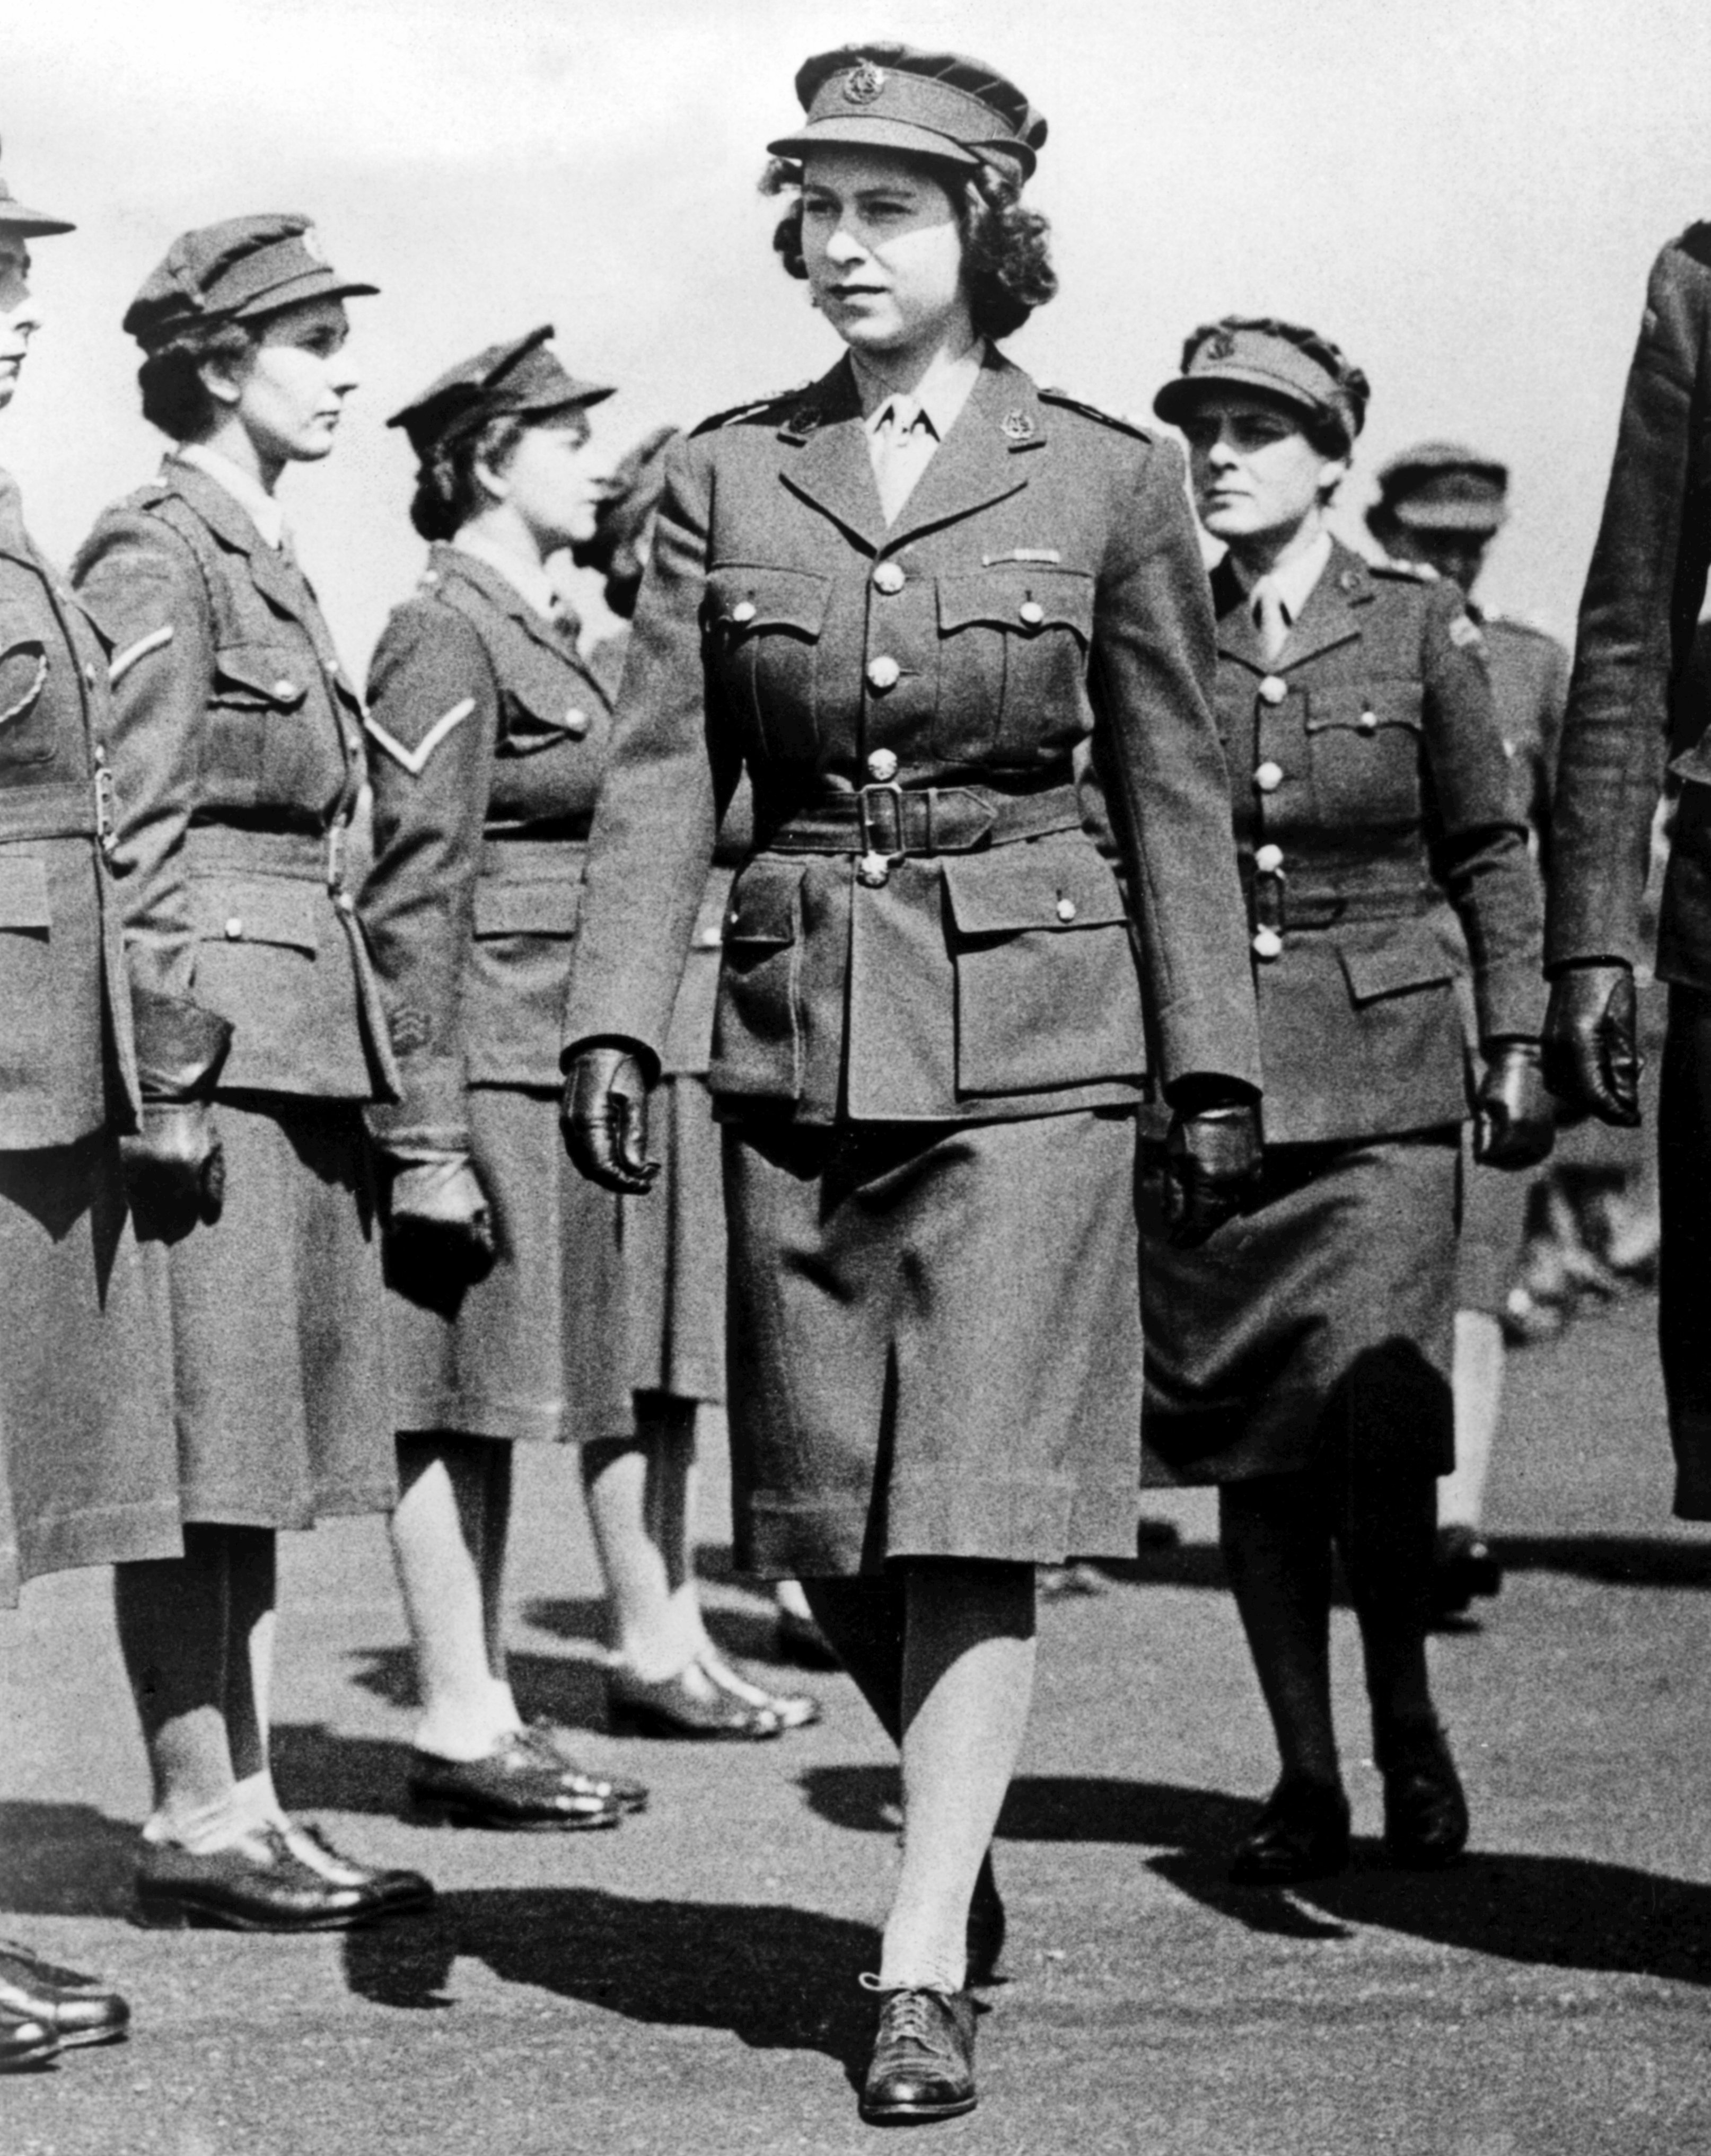 Princess Elizabeth as Junior Commander in the ATS inspecting The Motor Transport Training Centre at Camberley, Surrey during the Second World War. Circa May 1945. | Source: Getty Images